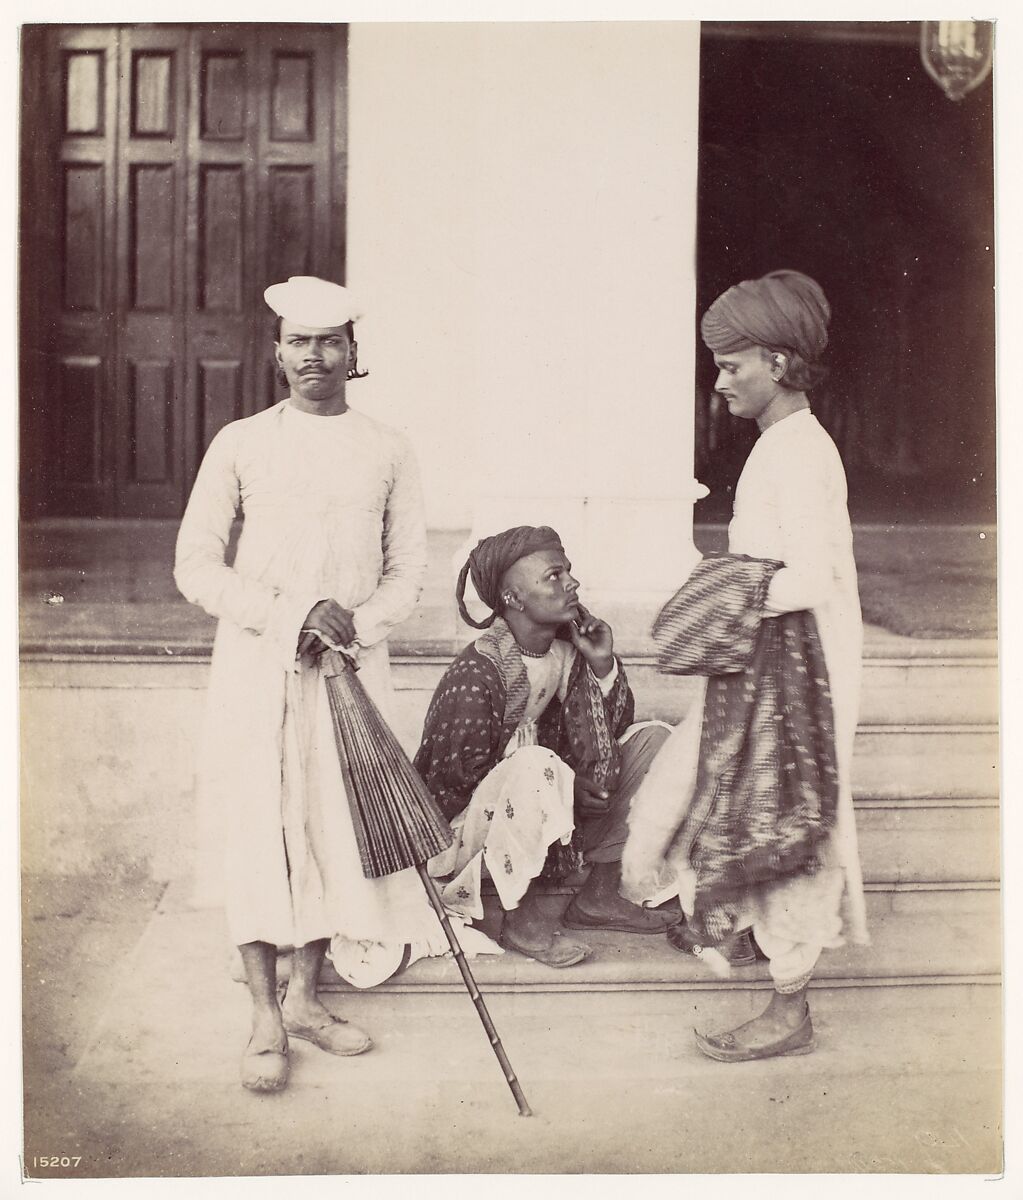 Marwaree Brokers, Francis Frith (British, Chesterfield, Derbyshire 1822–1898 Cannes, France), Albumen silver print from glass negative 